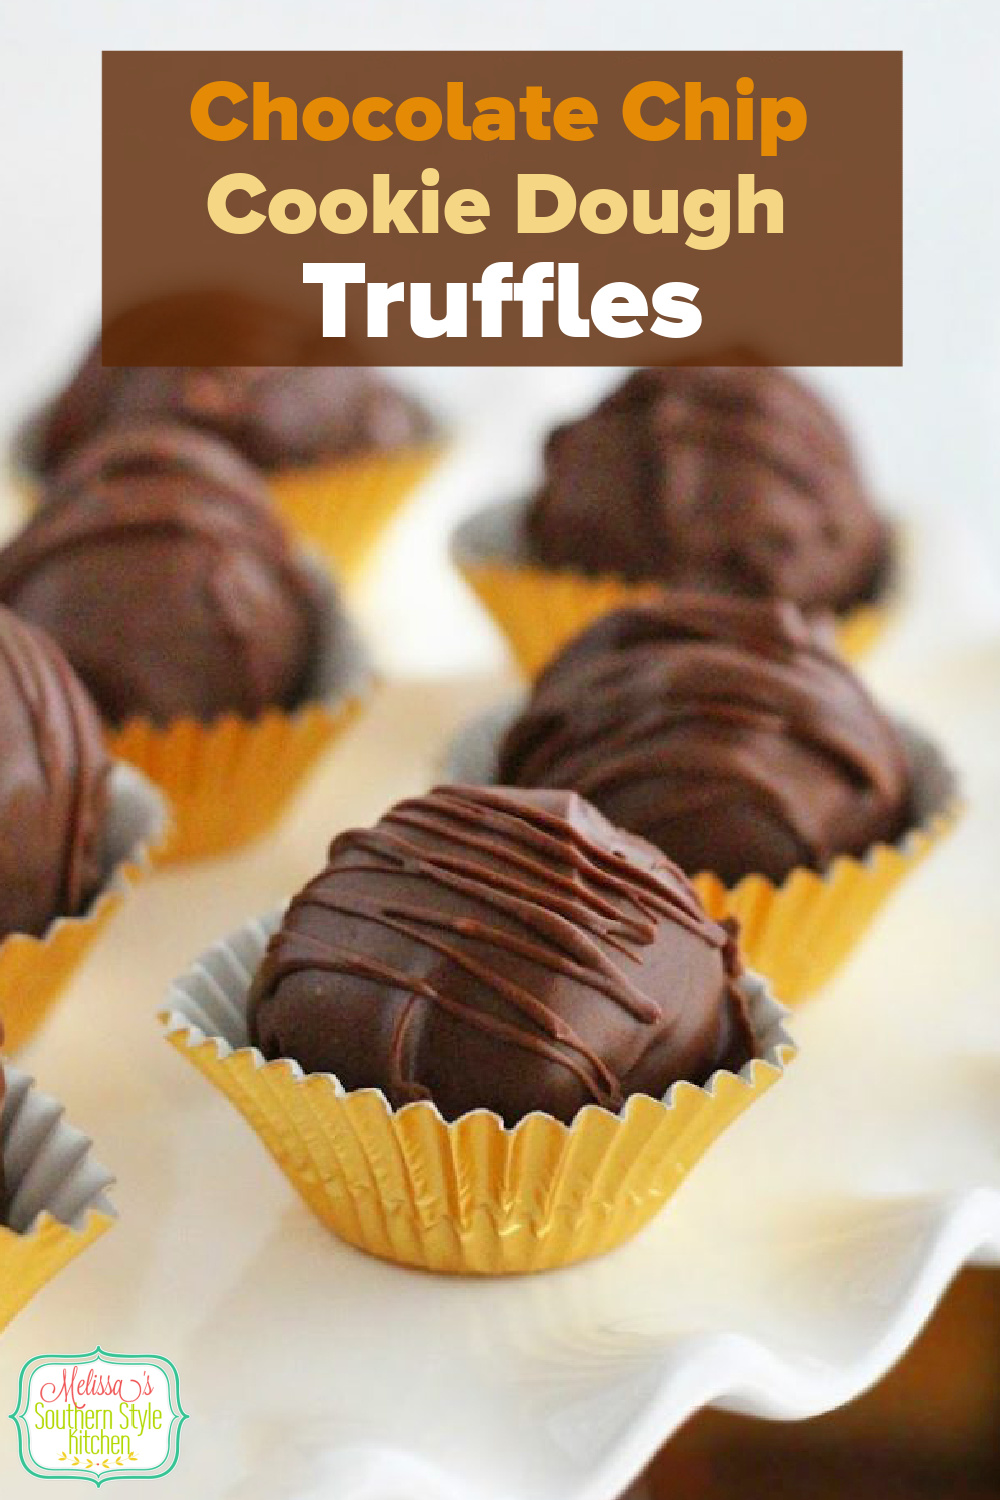 Don't wait until the holidays to Indulge in these eggless Chocolate Chip Cookie Dough Truffles #chocolatechipcookiedough #chocolatechipcookies #cookiedoughrecipes #egglesscookiedough #holidaybaking #truffles #cookiedoughtruffles #chocolatechipcookiedoughtruffles #chocolate #chocolatetruffles via @melissasssk